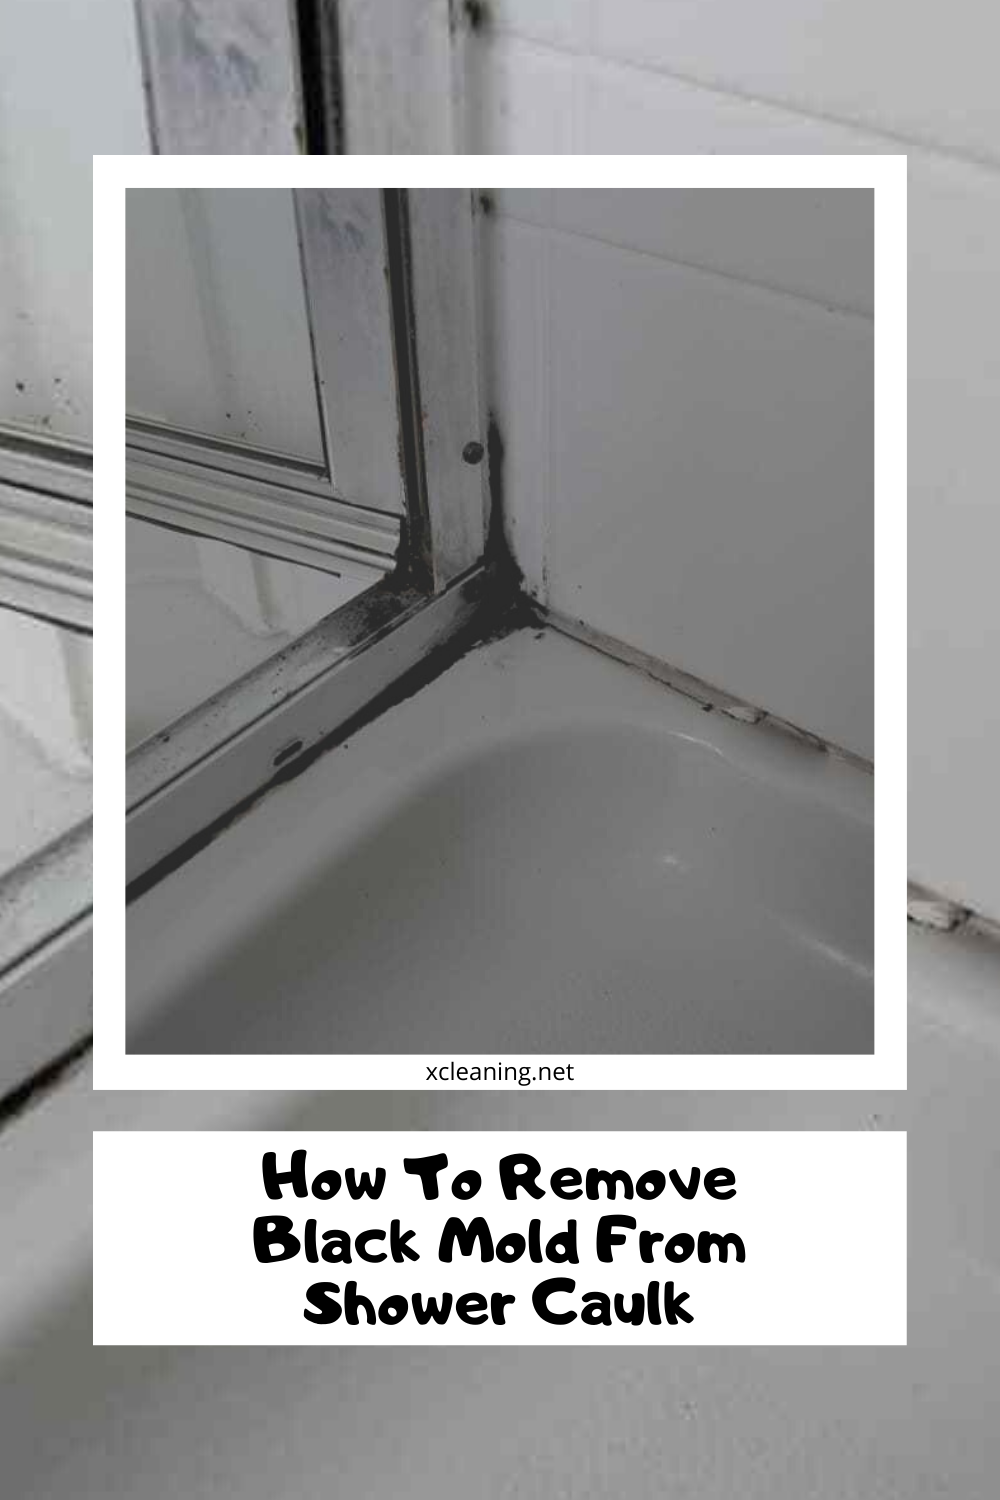 How To Remove Black Mold From Shower, Getting Rid Of Mold In Bathroom Caulking